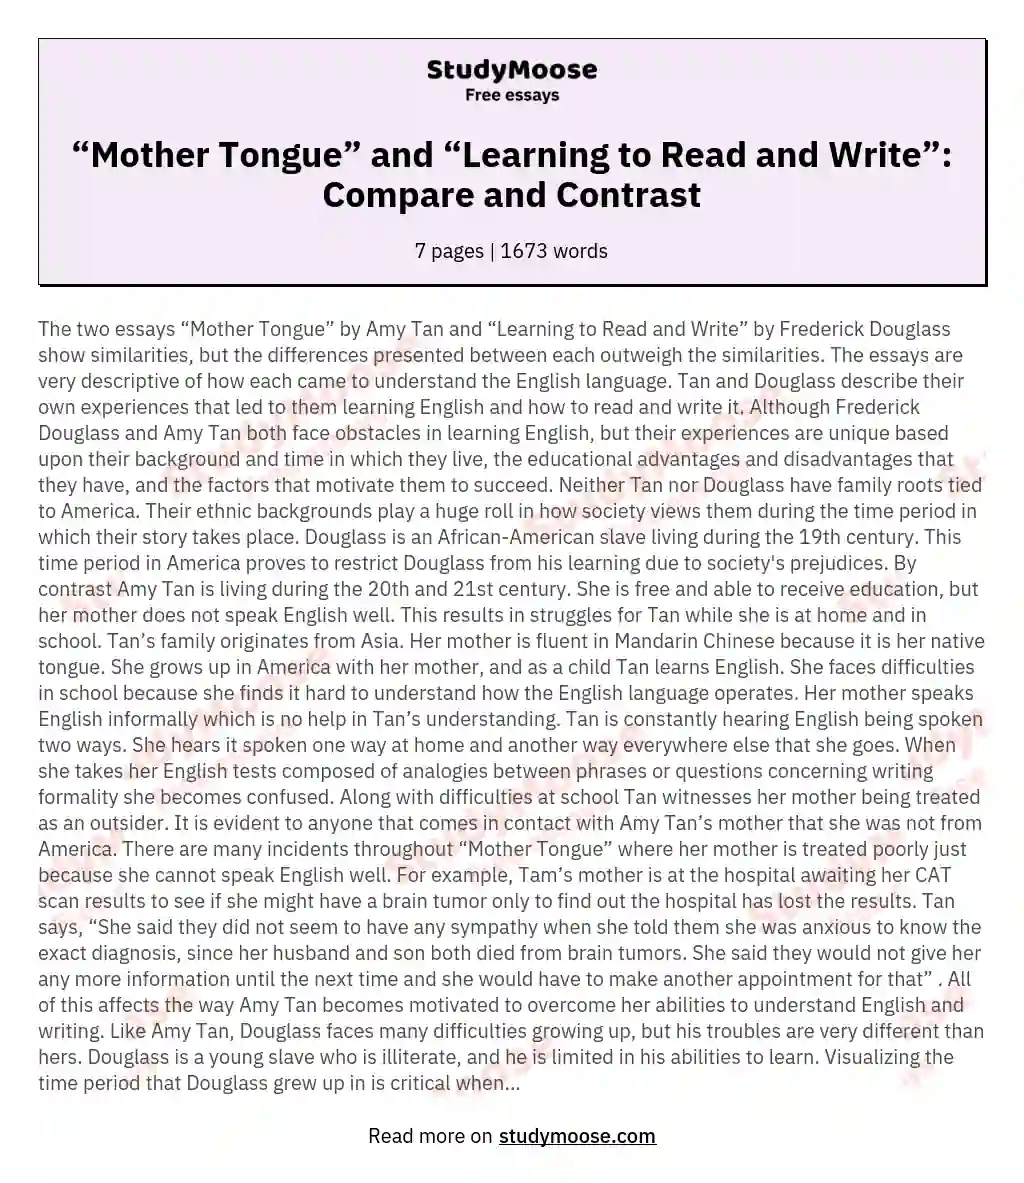 “Mother Tongue” and “Learning to Read and Write”: Compare and Contrast